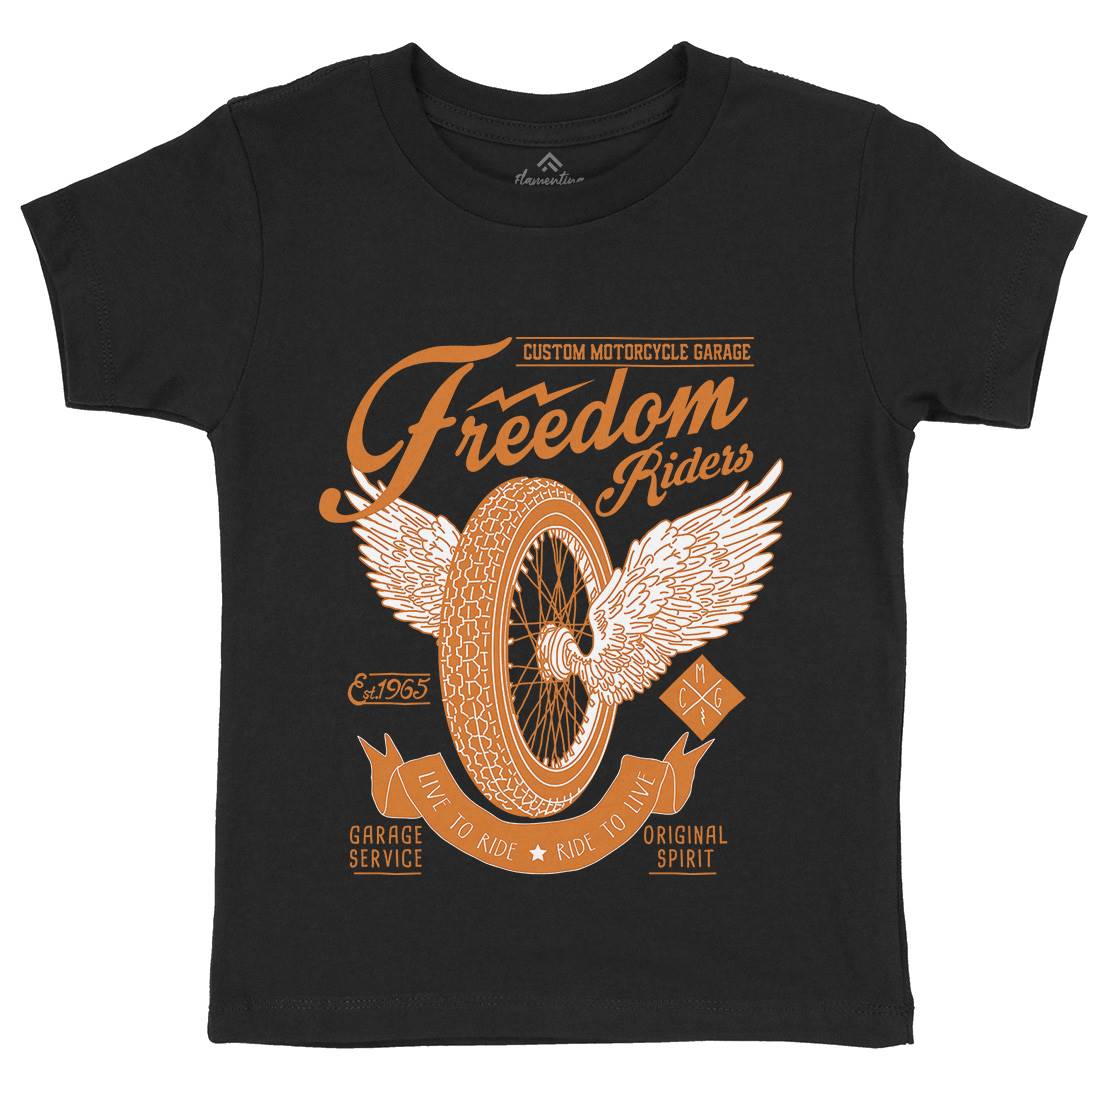 Freedom Riders Kids Crew Neck T-Shirt Motorcycles A989